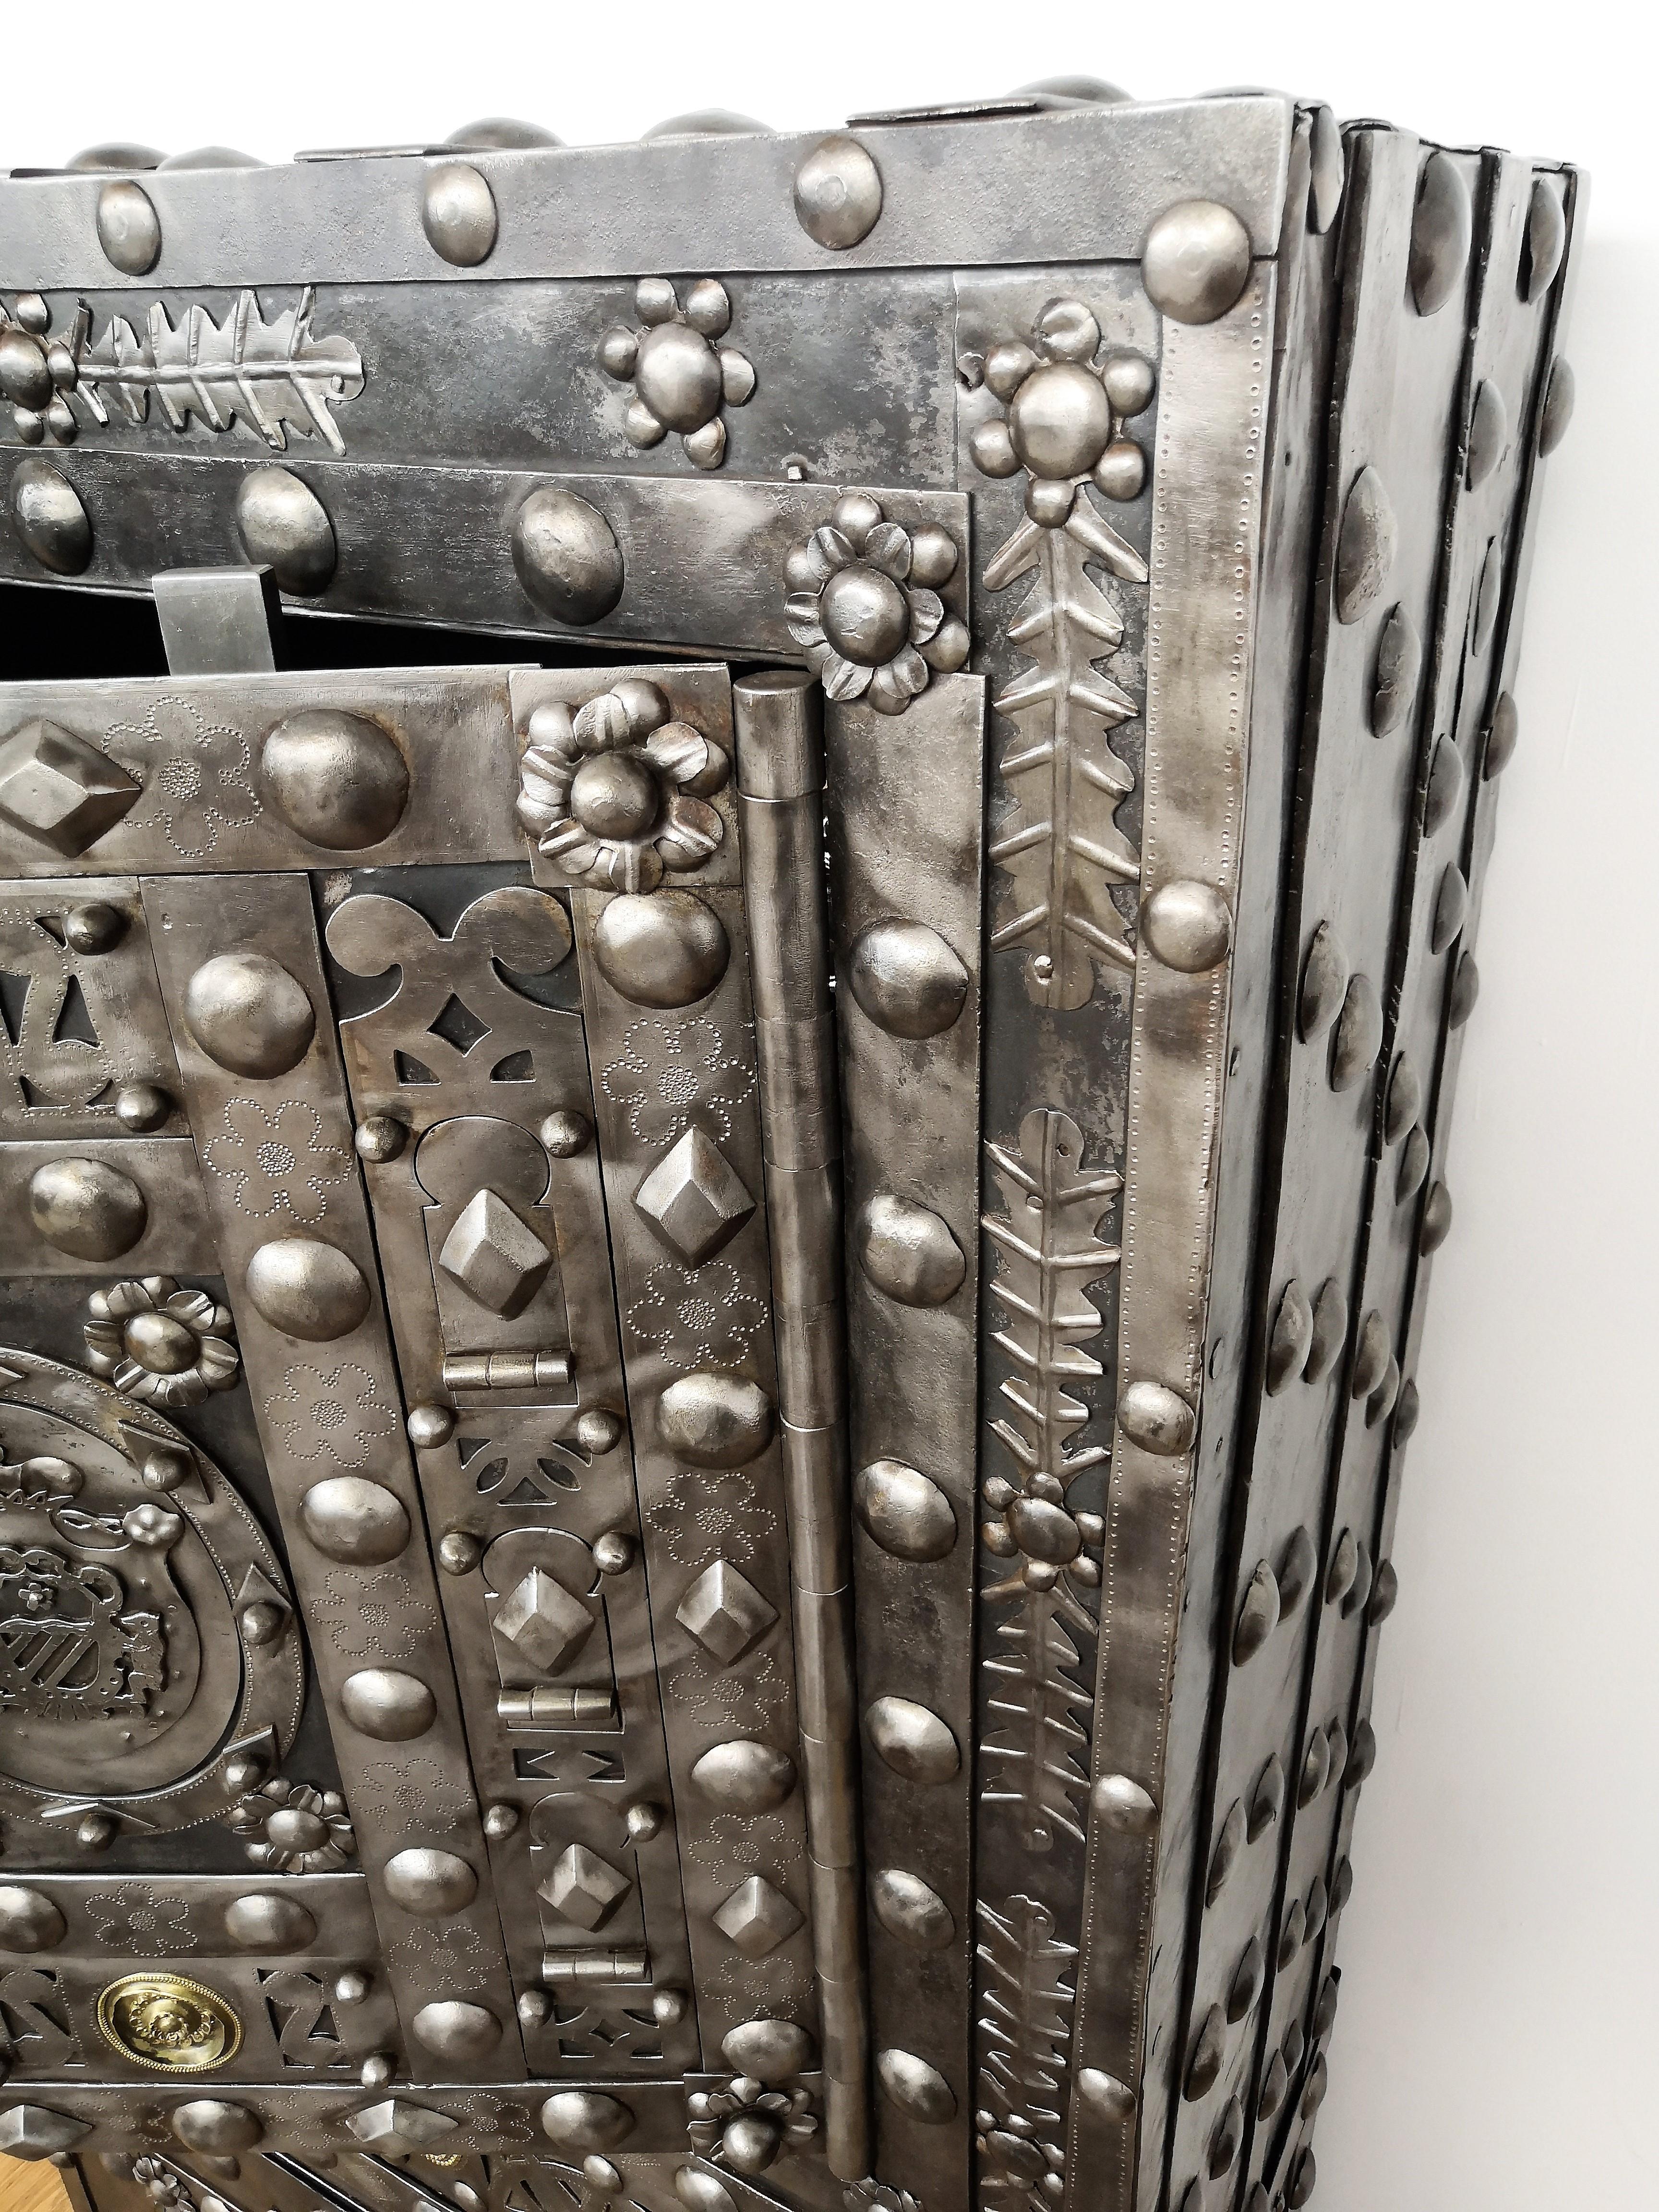 Northern Italian antique safe with typical all-around hobnails, dated circa 1790-1820, probably used inside a small feud fiefdom or fortified town castle of the Piedmont region, Italy's second-largest region where great craftsmanship and history